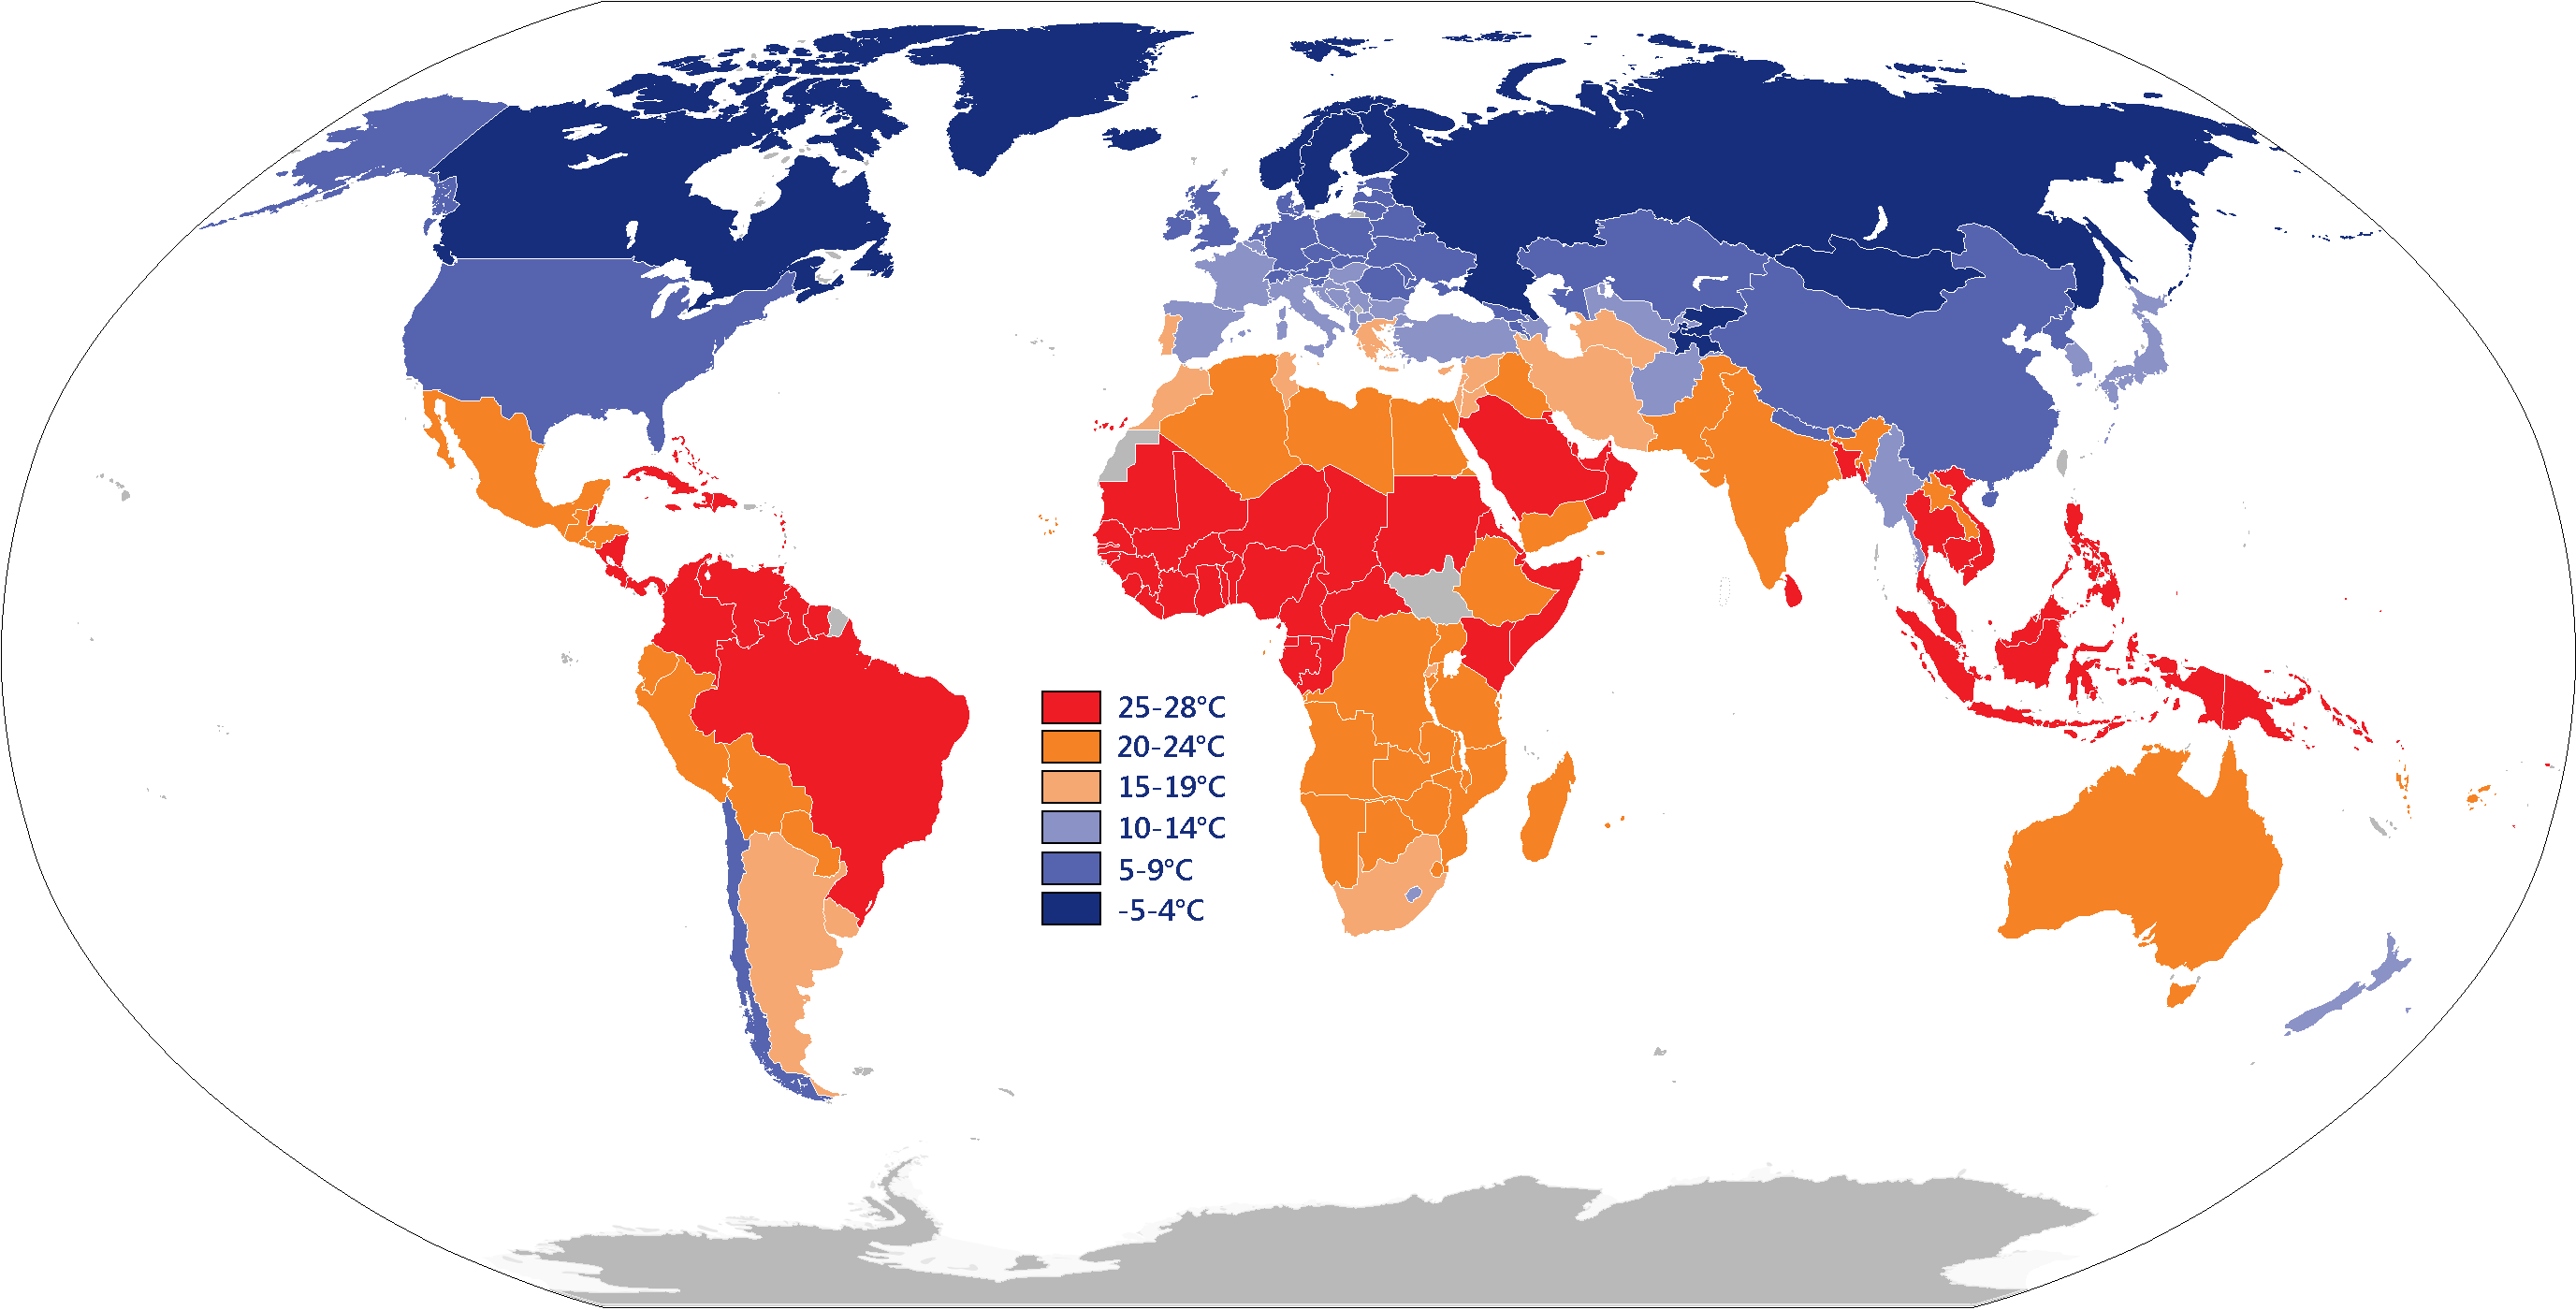 Average yearly temperature per country across the globe, showing that the countries with the highest average temperature are also those with the densest vegetation